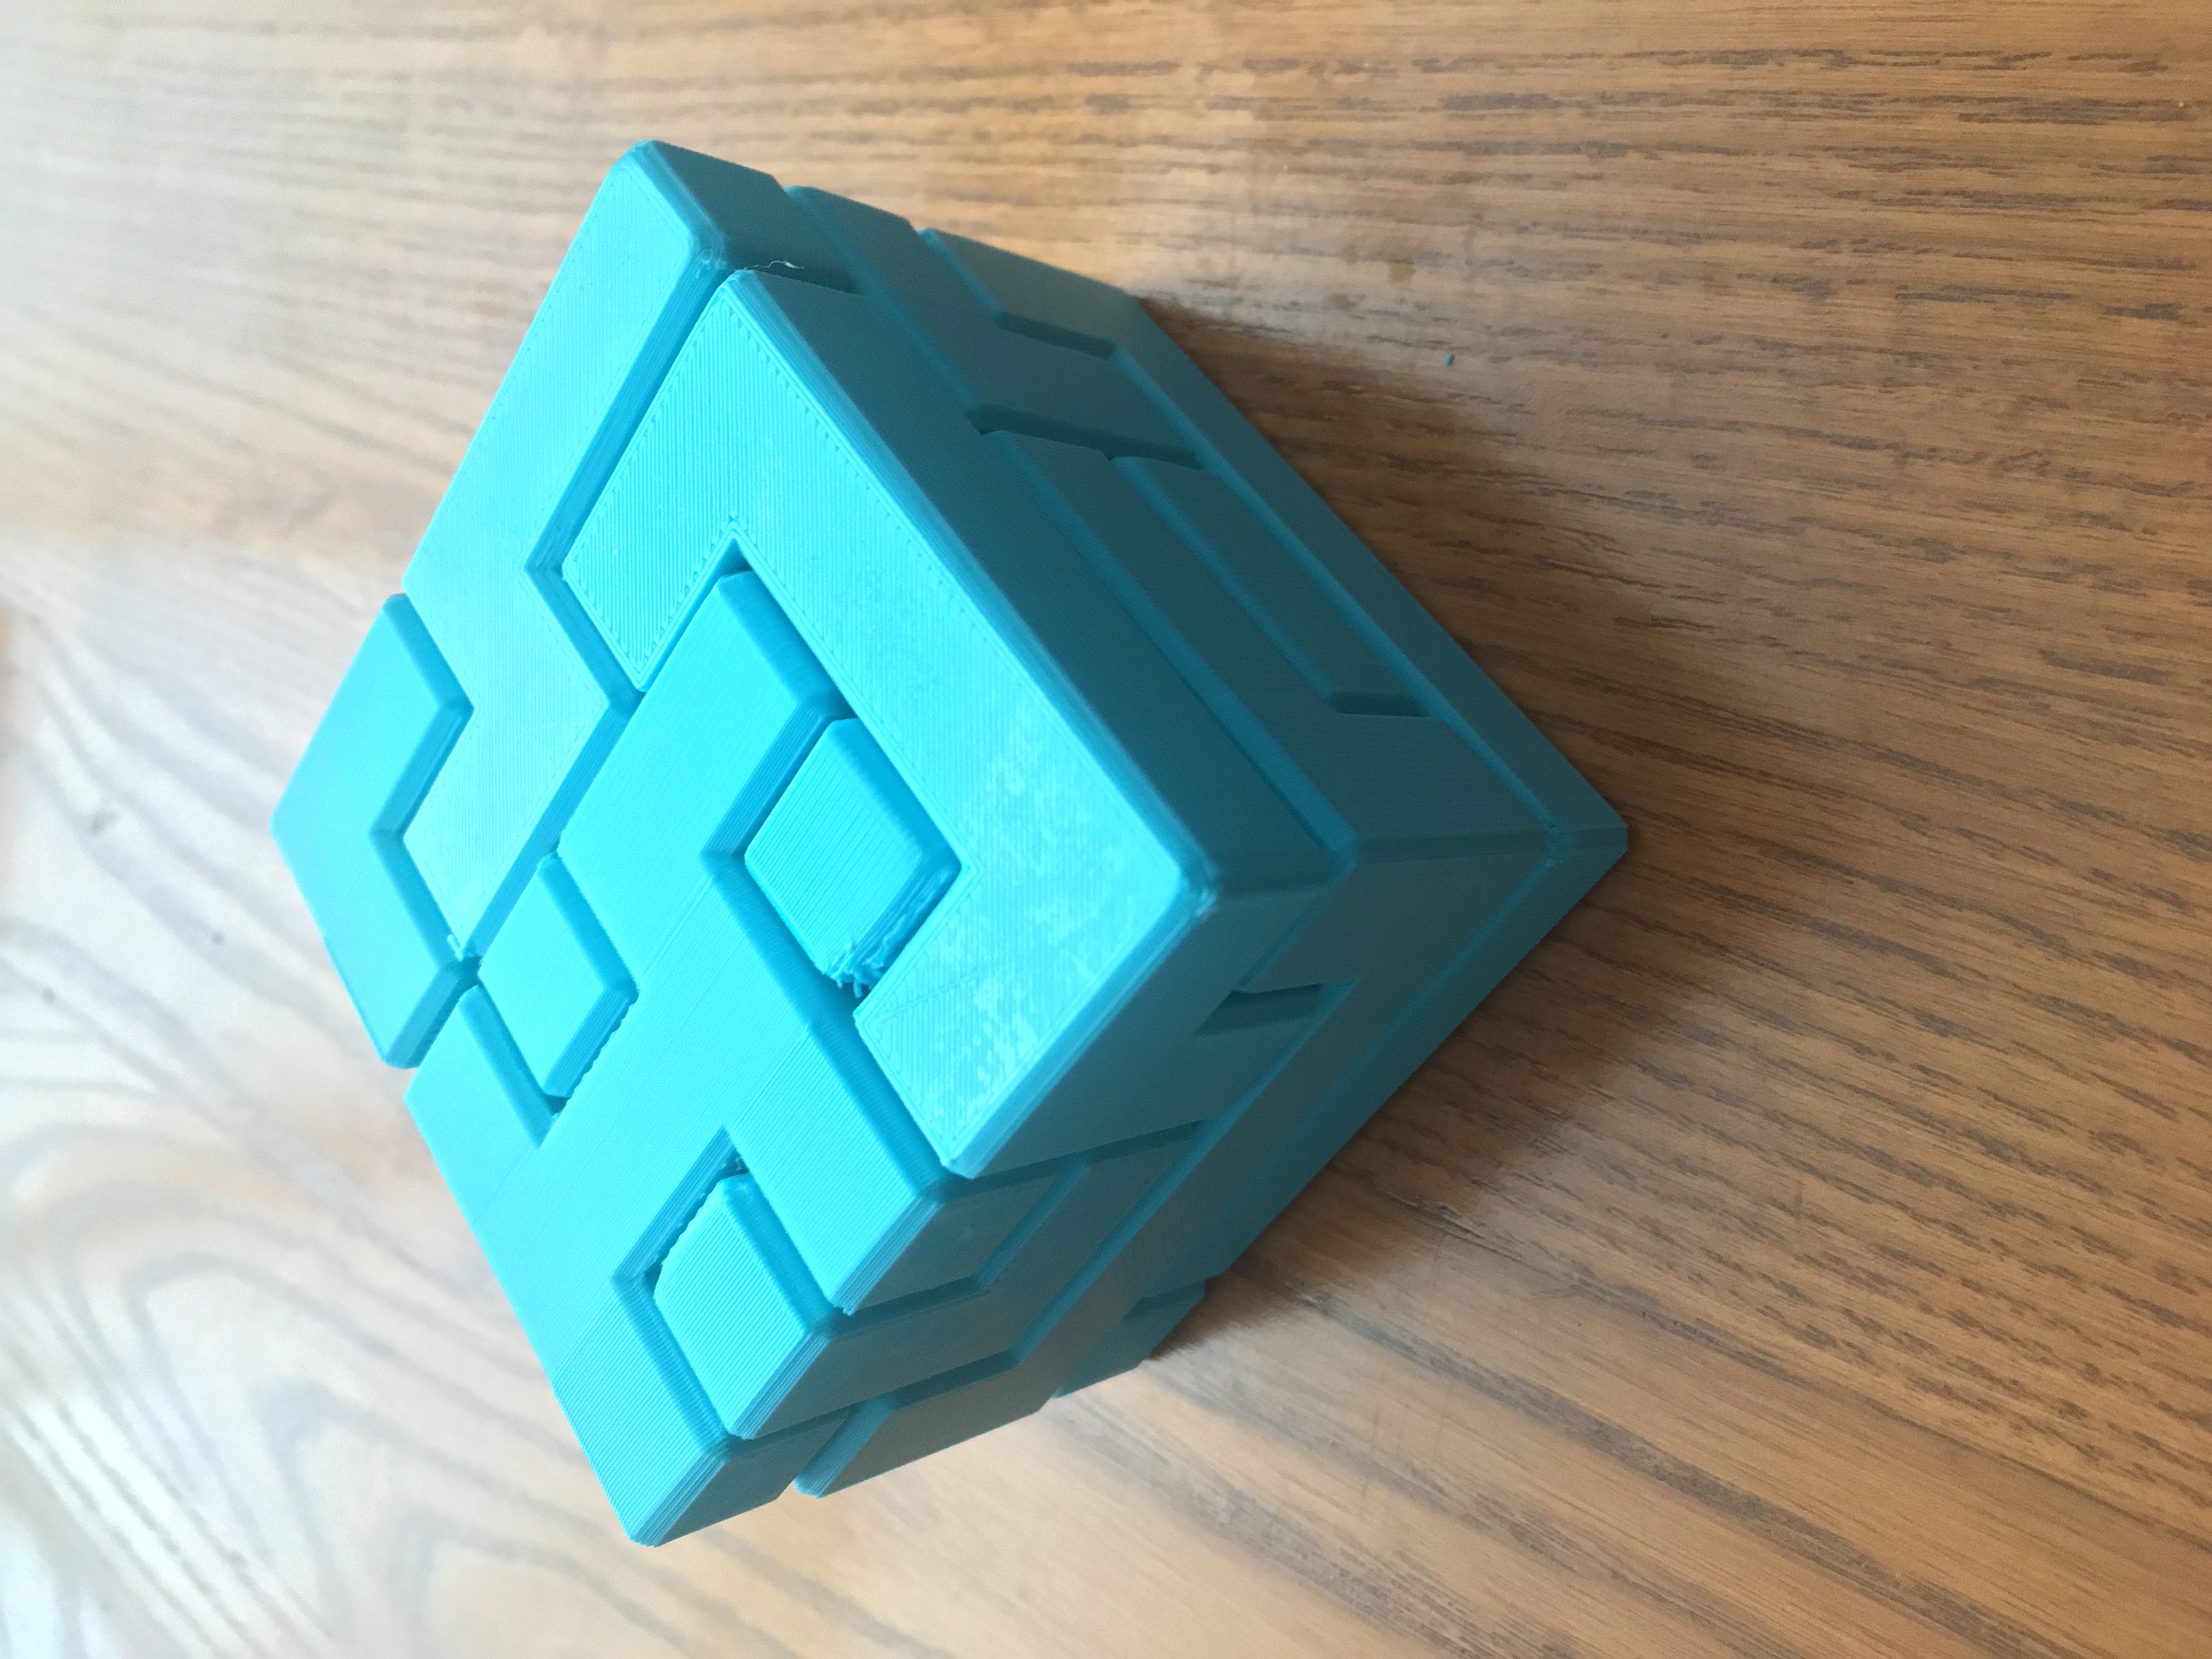 3D Printable Extremely difficult 5x5x4 puzzle cube by MVH